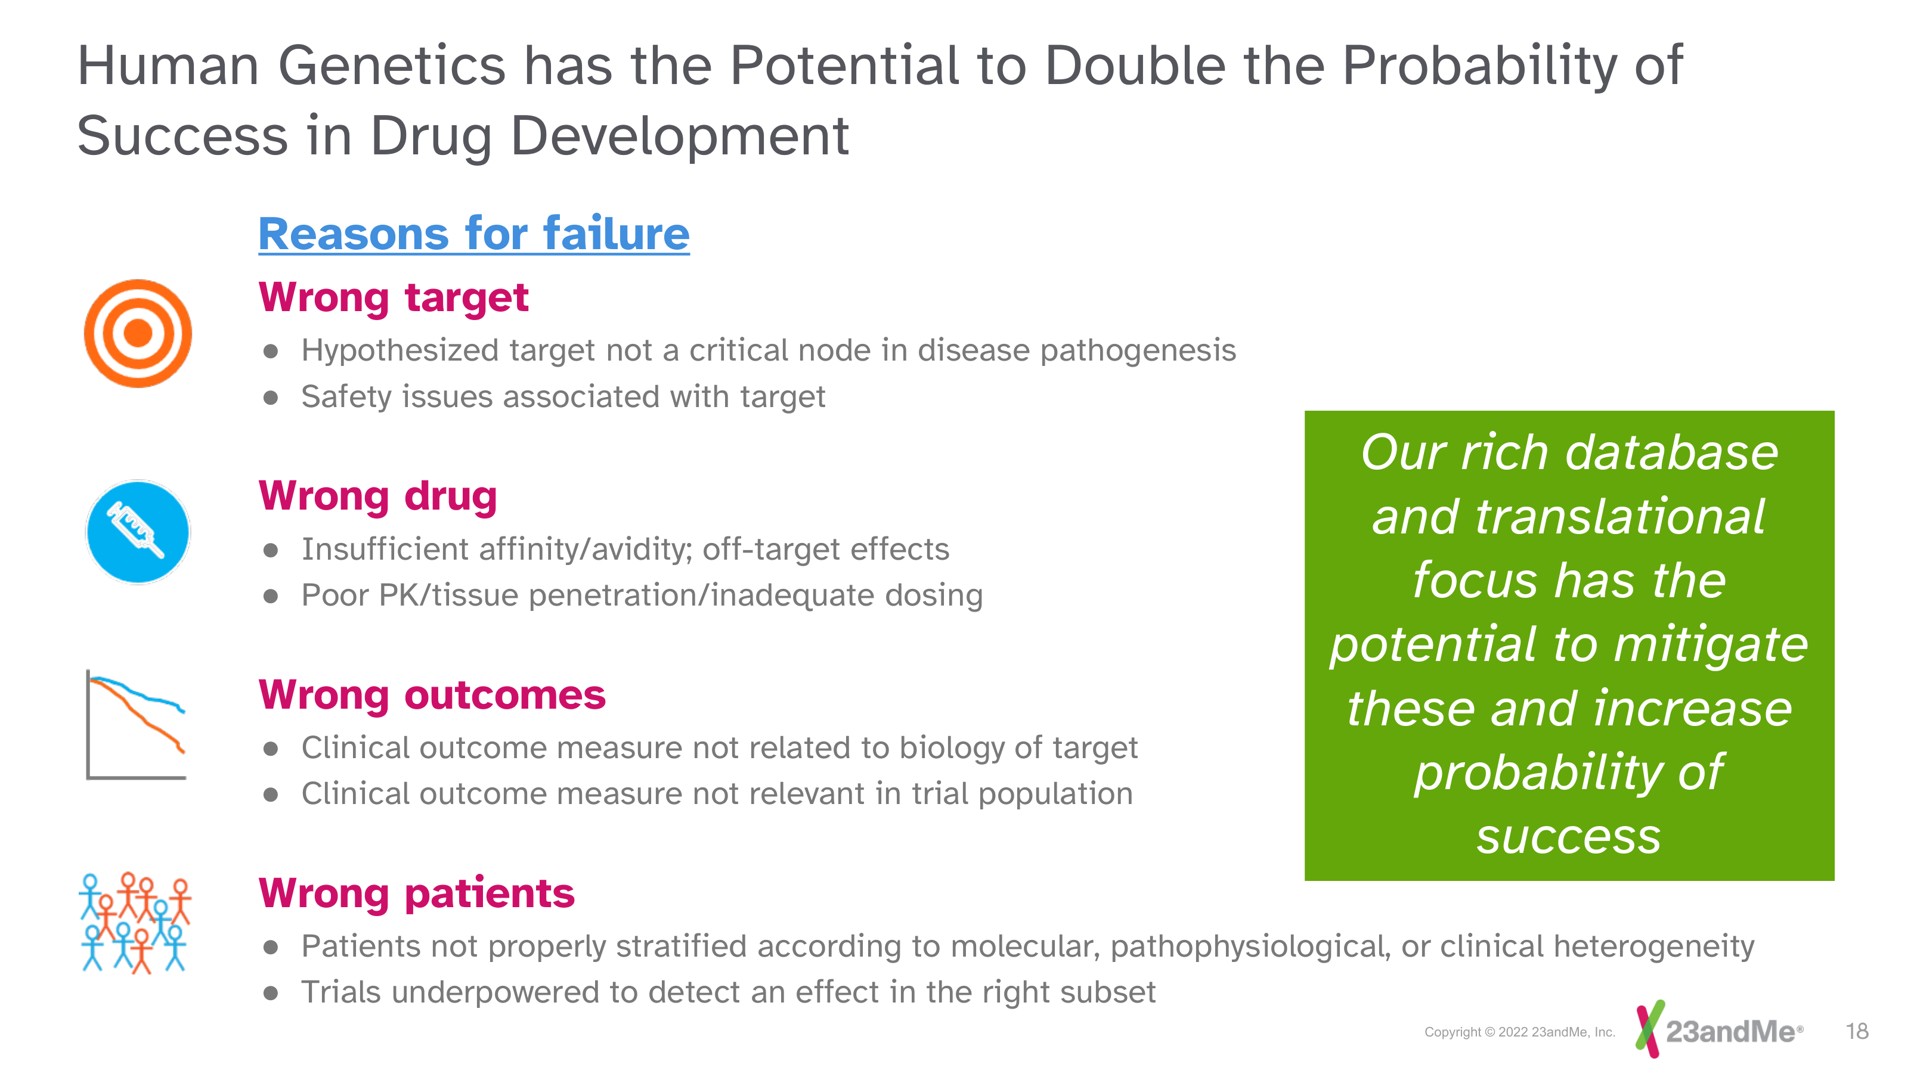 human genetics has the potential to double the probability of success in drug development wrong wrong outcomes and translational mitigate | 23andMe